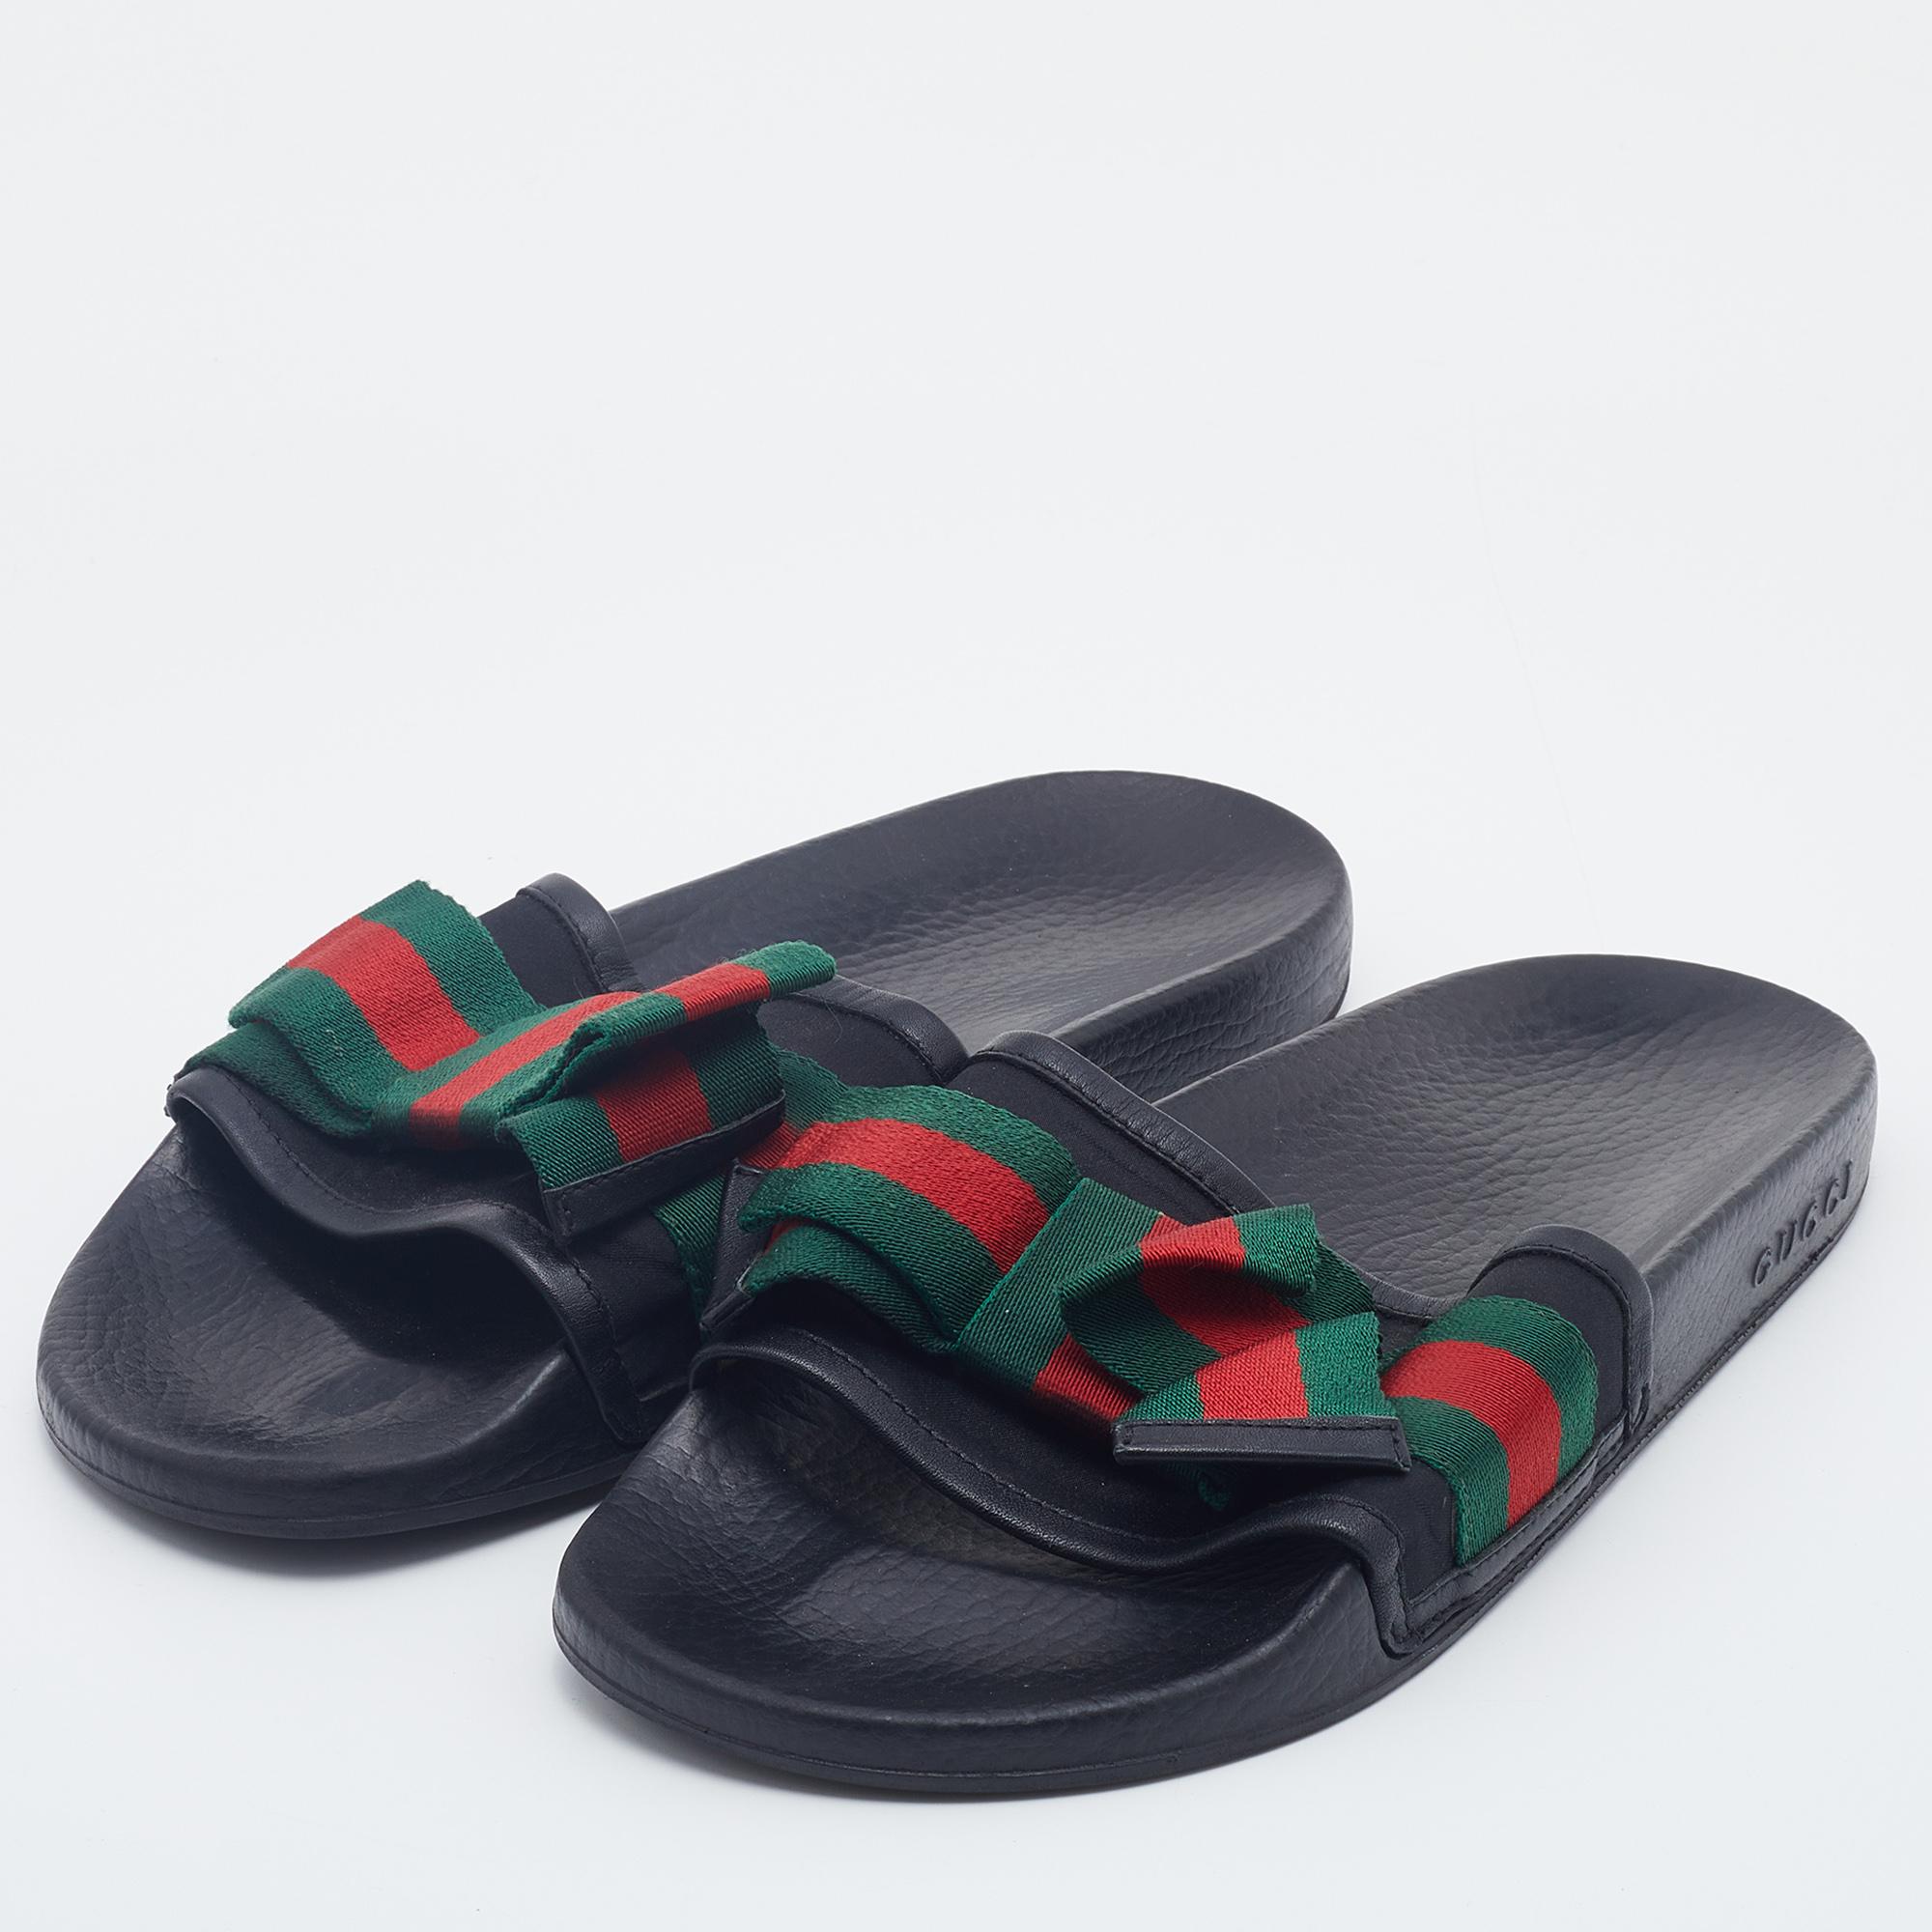 The Web stripe detailed bow on the vamps serve as a standout element of these Gucci sandals. Created from fabric and leather, they display a slip-on fitting, rubber soles, and comfortable insoles.

